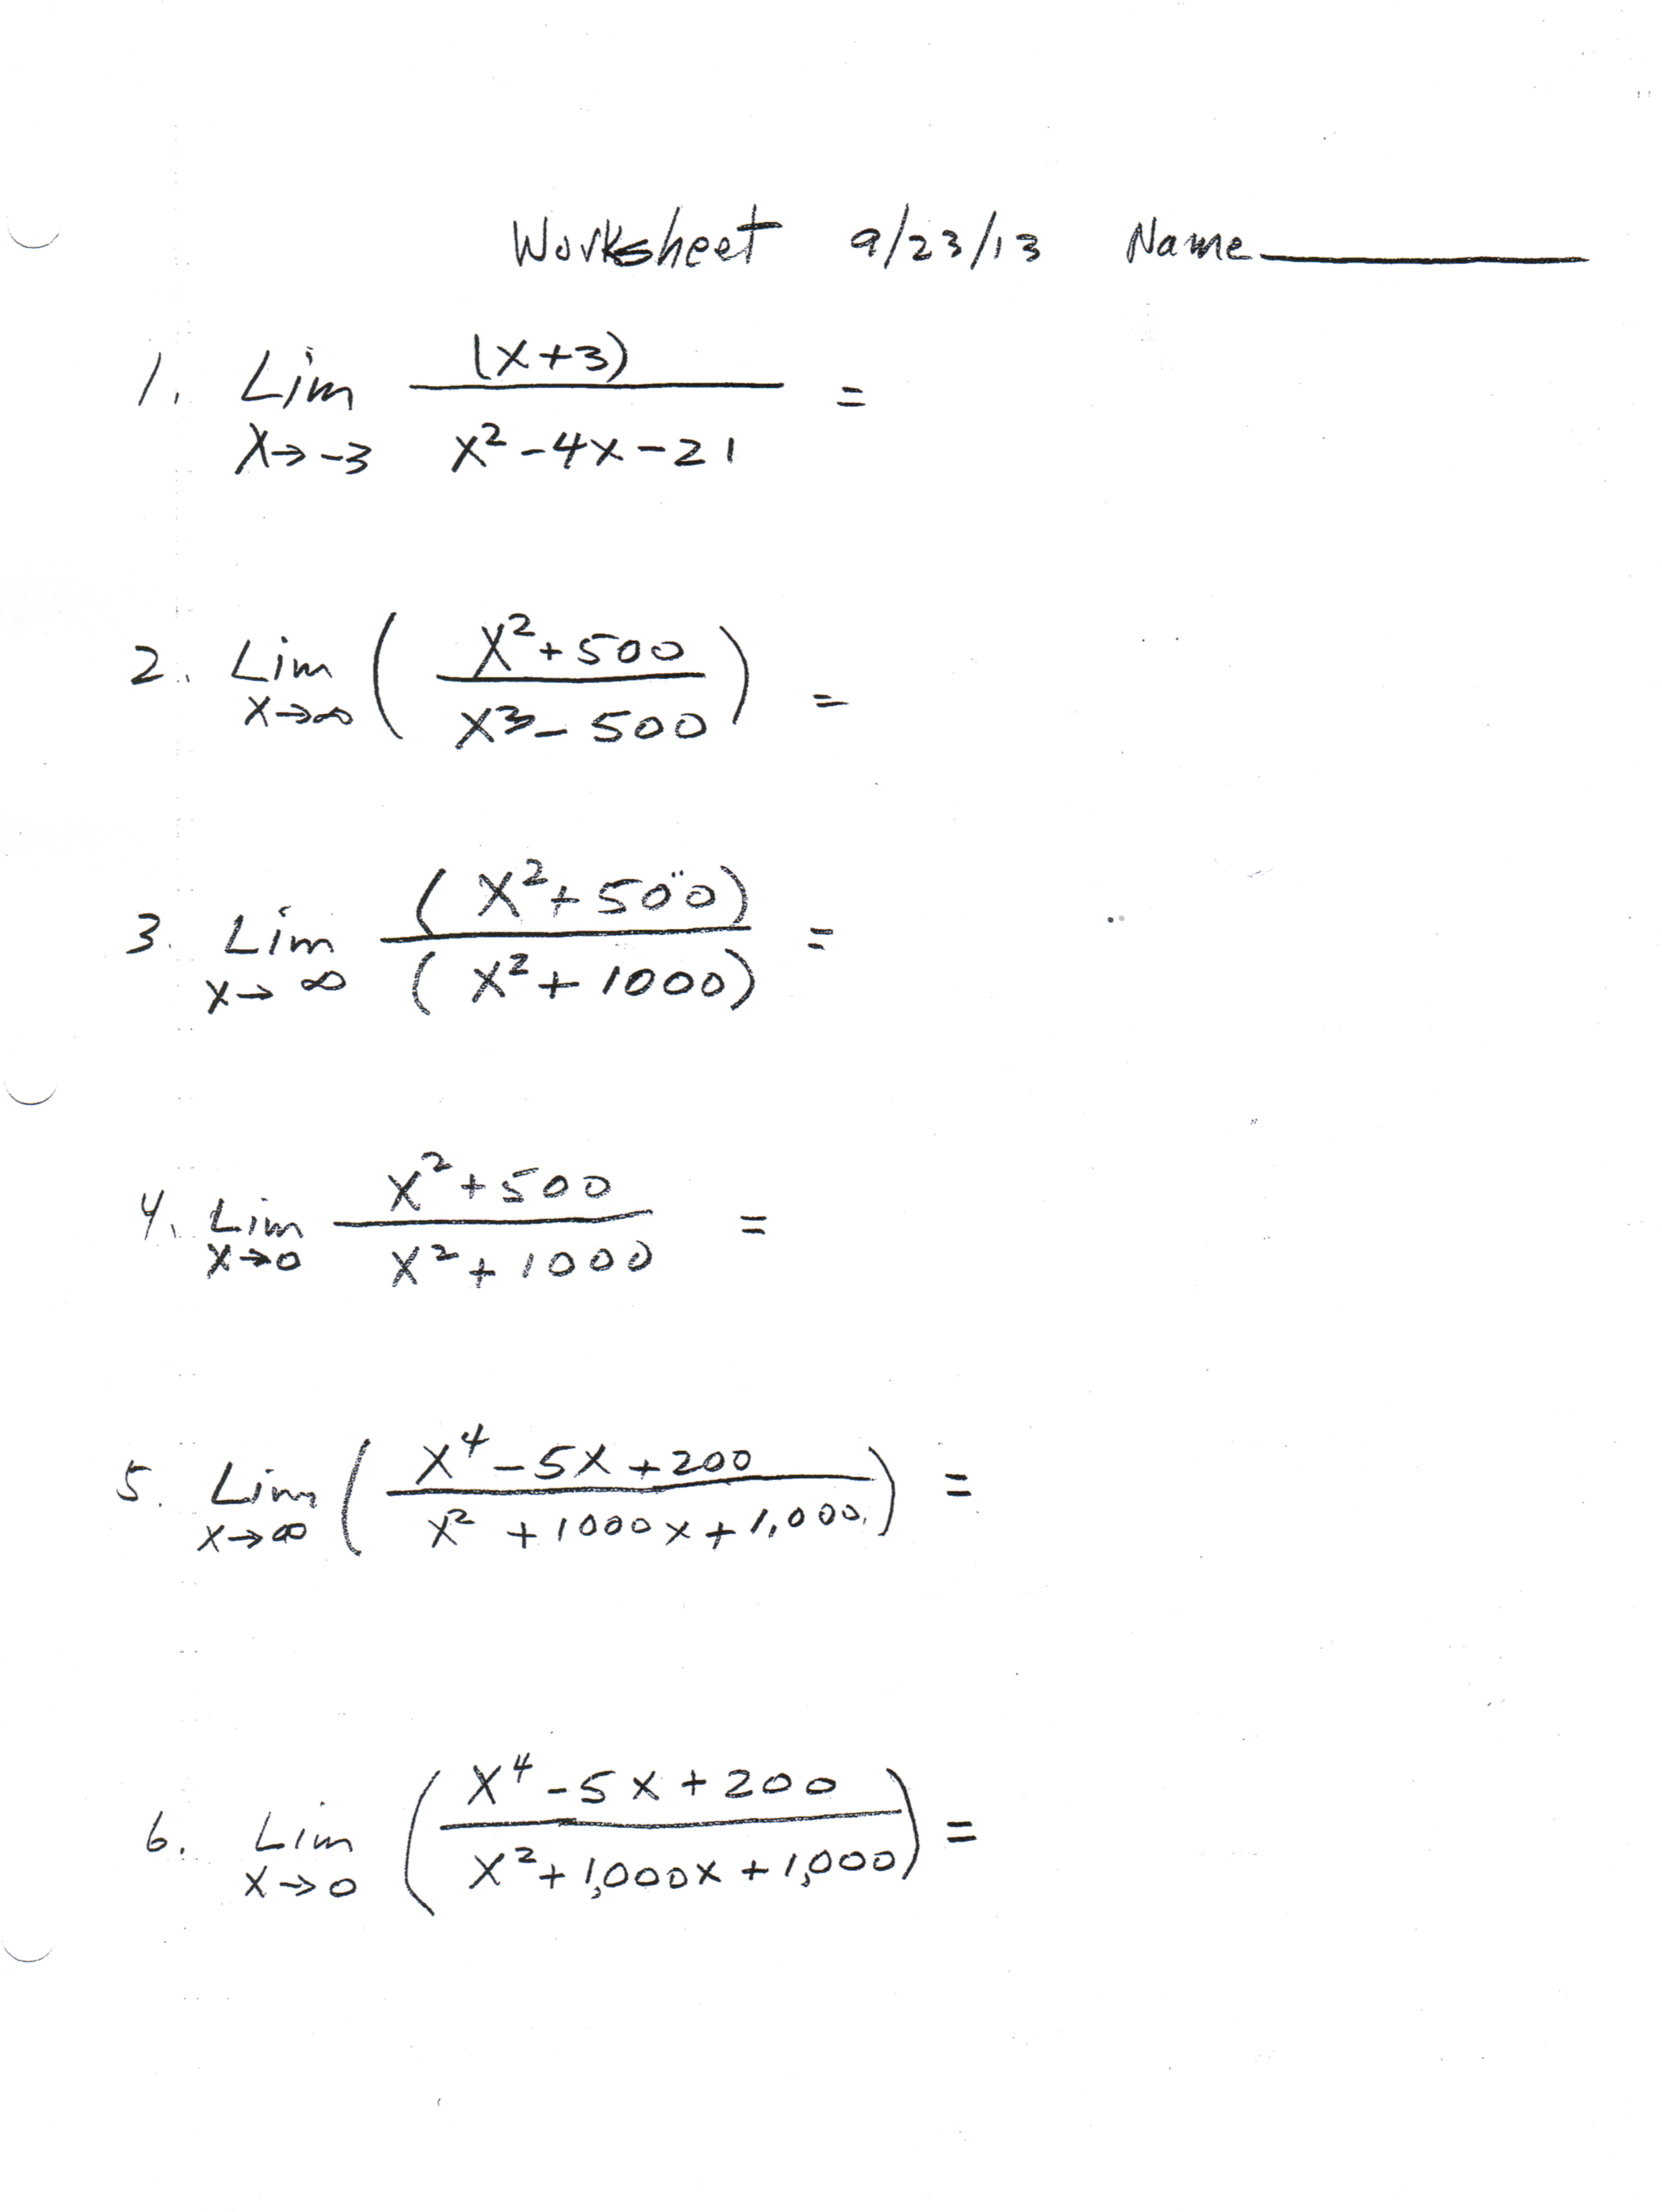 limits and assumptions for maths example